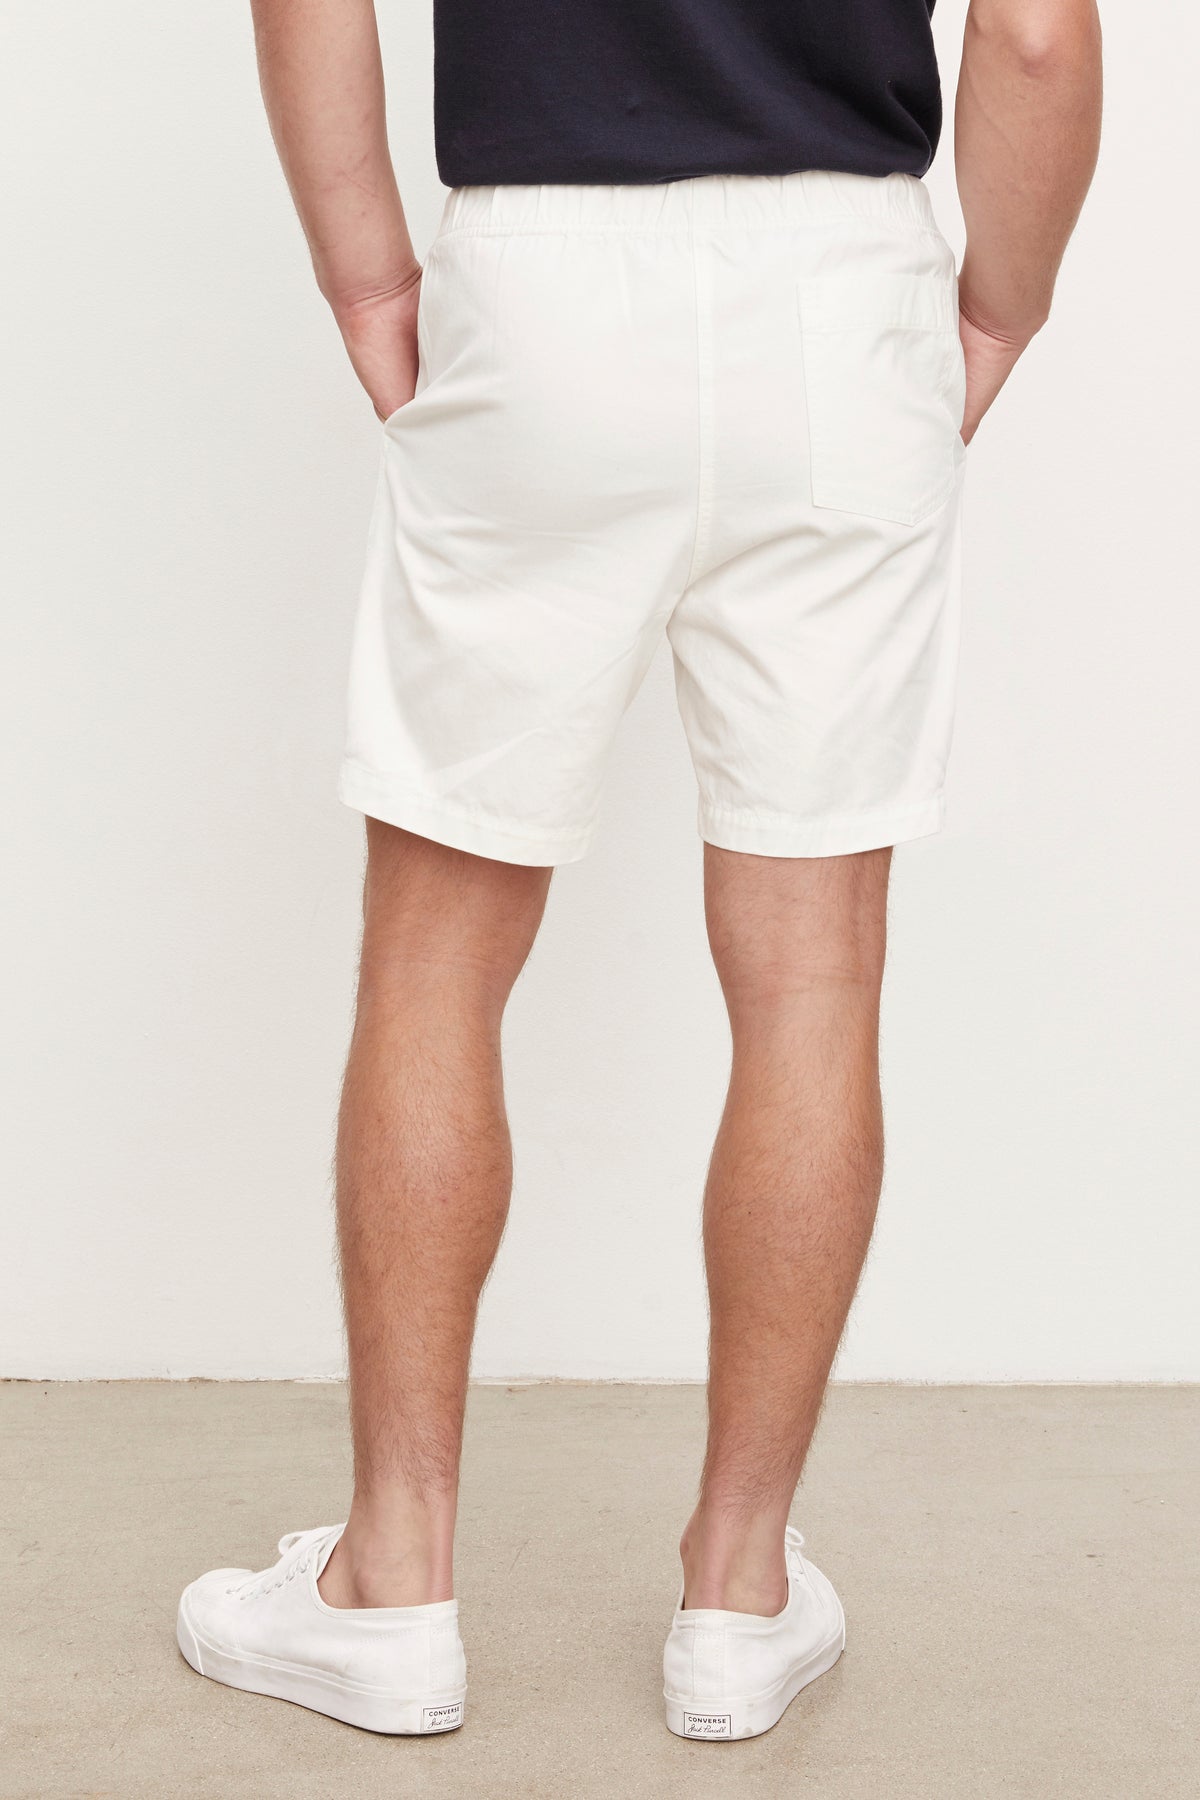 A man viewed from behind wearing white Fielder shorts and white sneakers, standing against a plain wall.-36753575903425